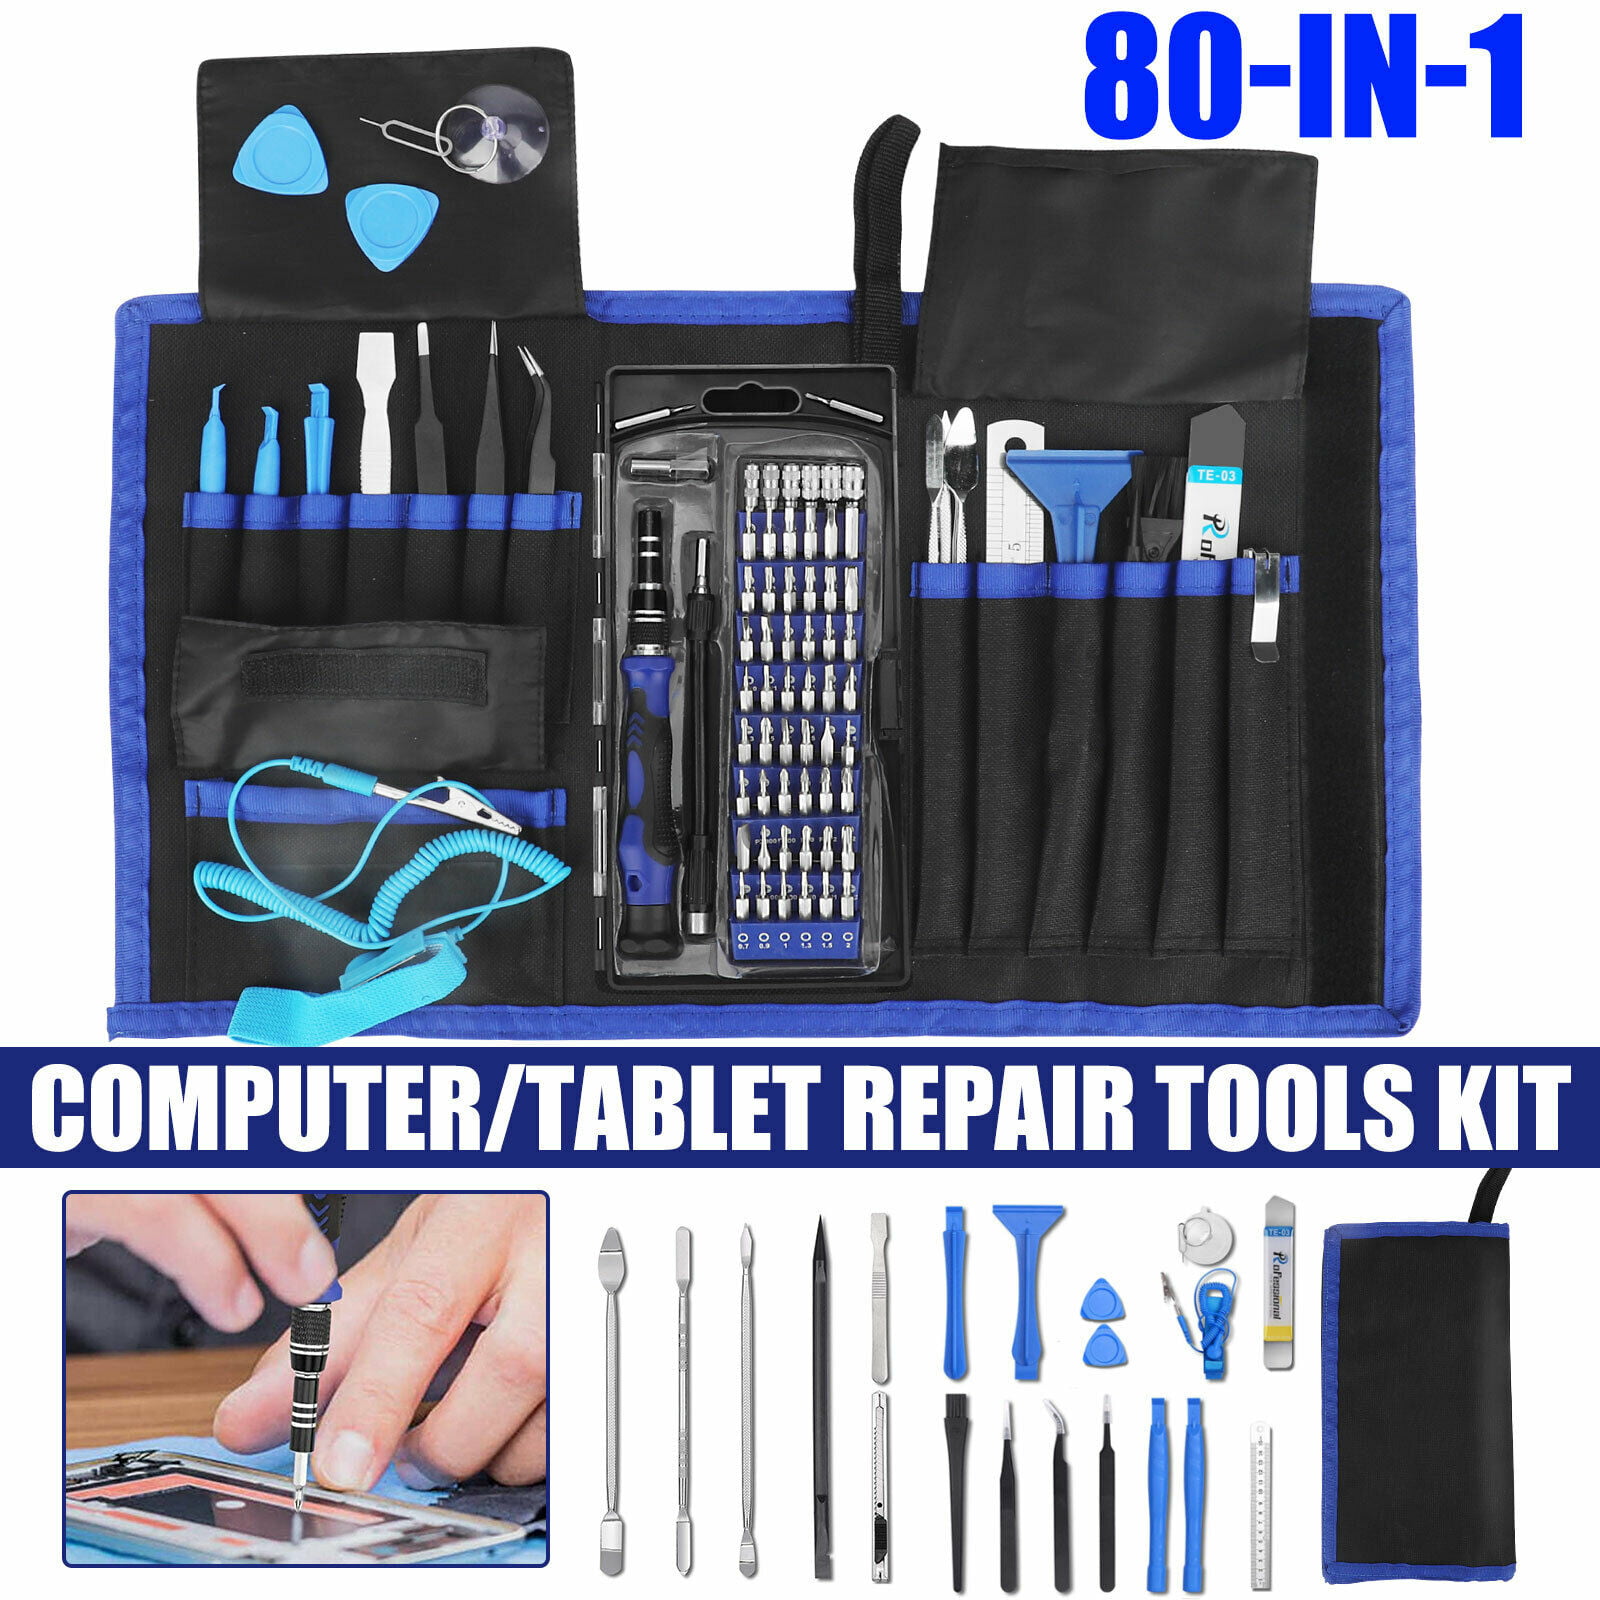 Smart phone Flexible Shaft Preciva 37 in 1 Magnetic Screwdriver Kit Game Console Precision Driver Kit Electronic Repair Tool with 28 Bits Tablet Extension Rod for Mobile Phone PC Repairing.